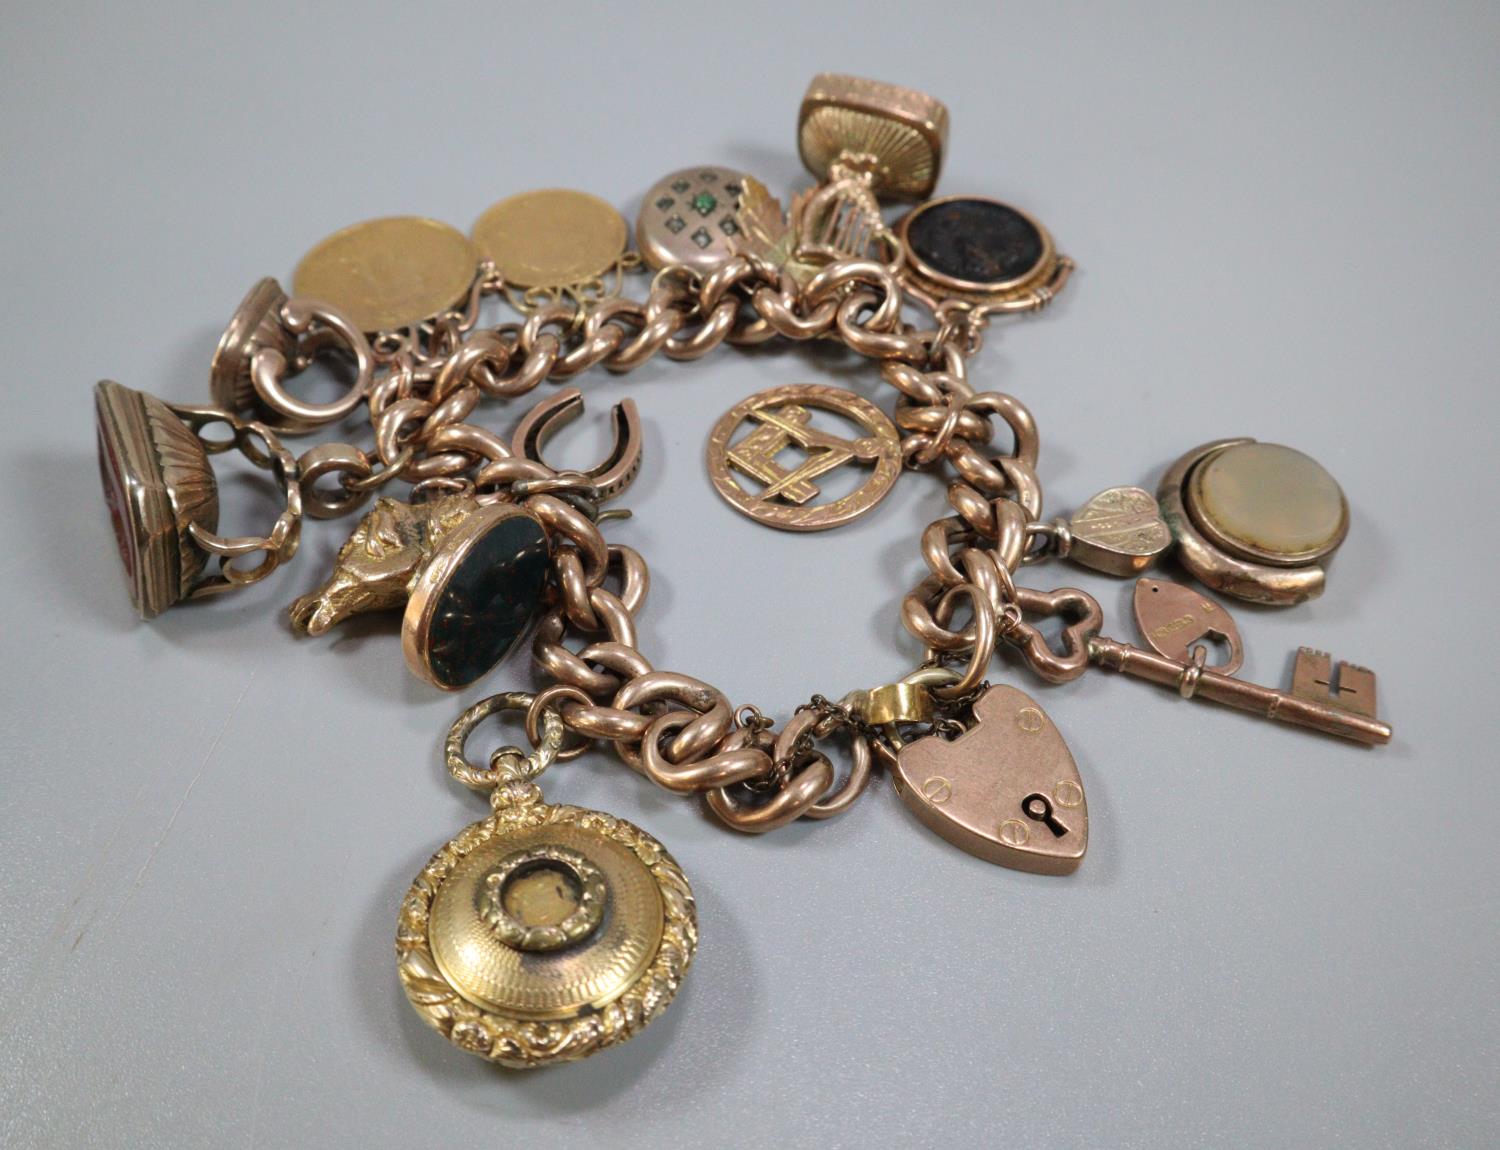 9ct gold curb link charm bracelet with assorted charms including: Masonic, harp, Intaglio seal - Image 3 of 4